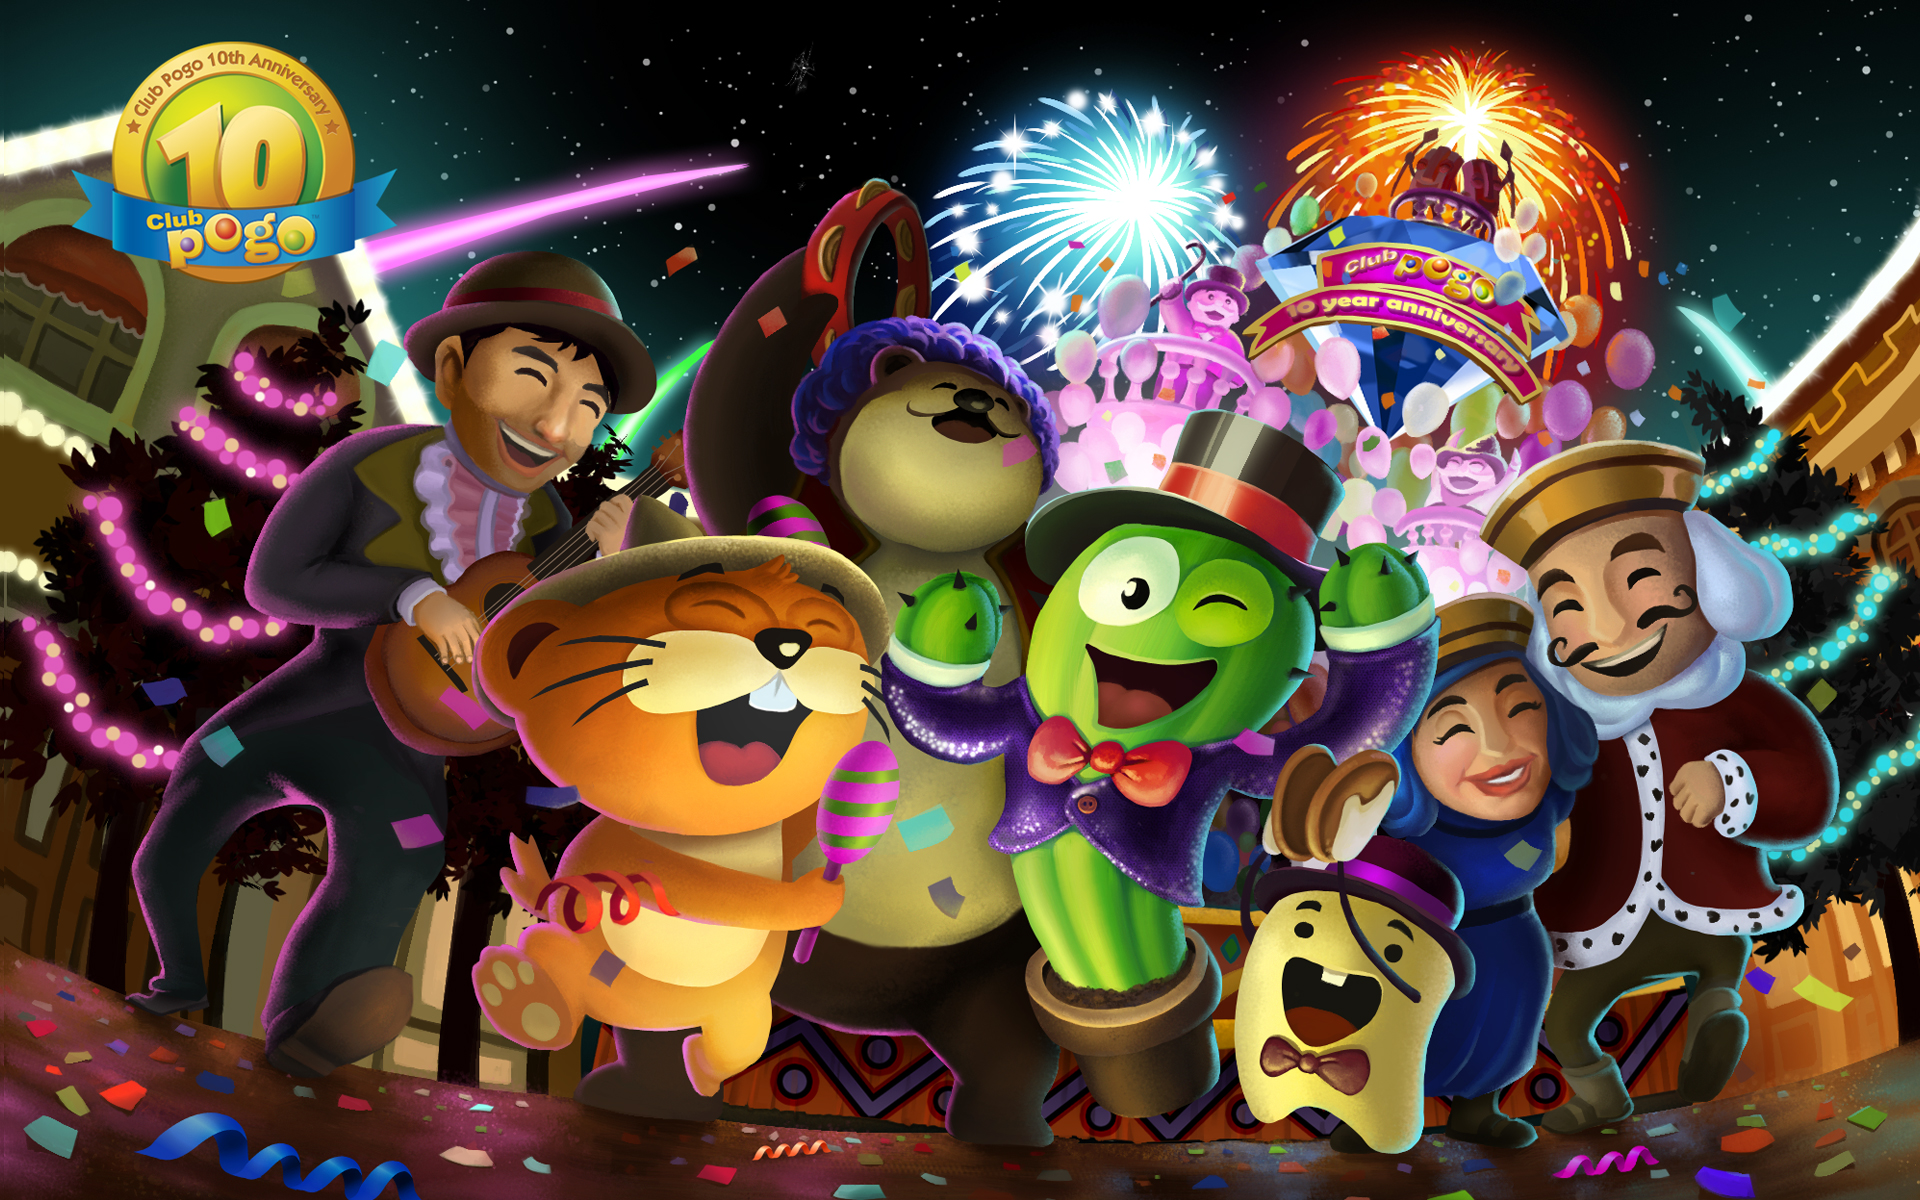 Deck Out Your Desktop With A Club Pogo Year Anniversary Wallpaper